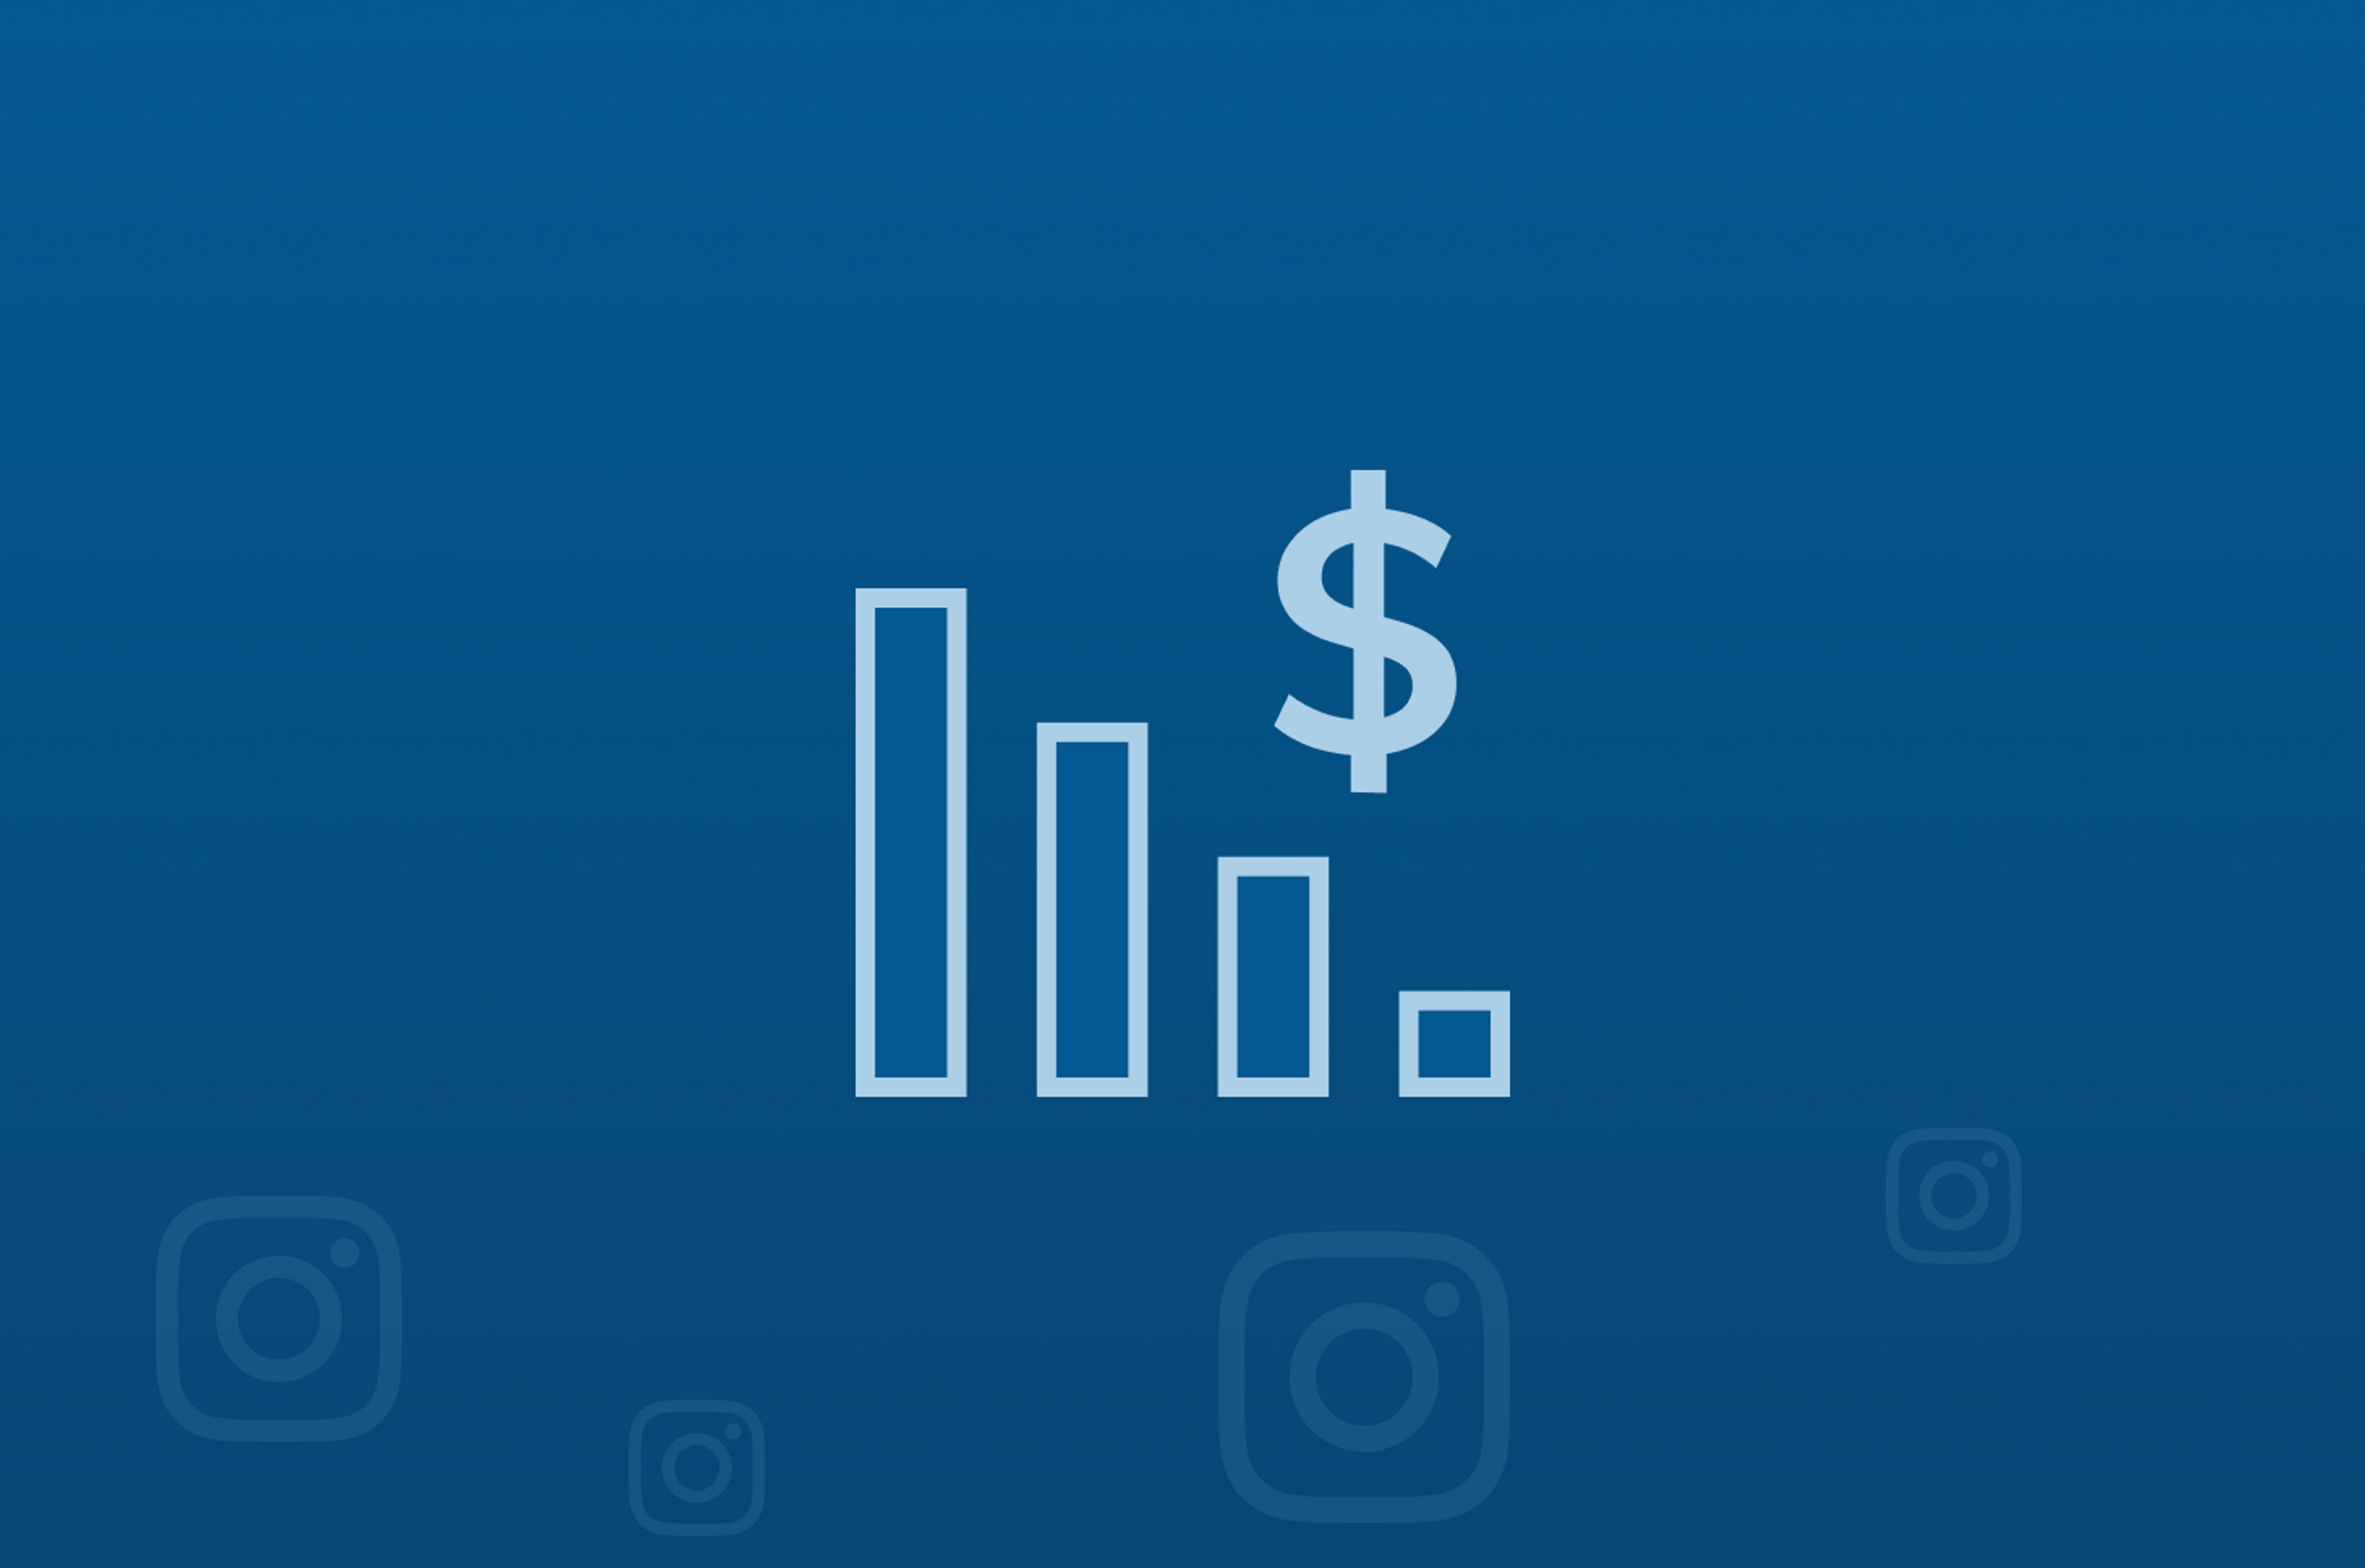 Facebook’s Instagram: Making the Switch to Cassandra from Redis, a 75% ‘Insta’ Savings